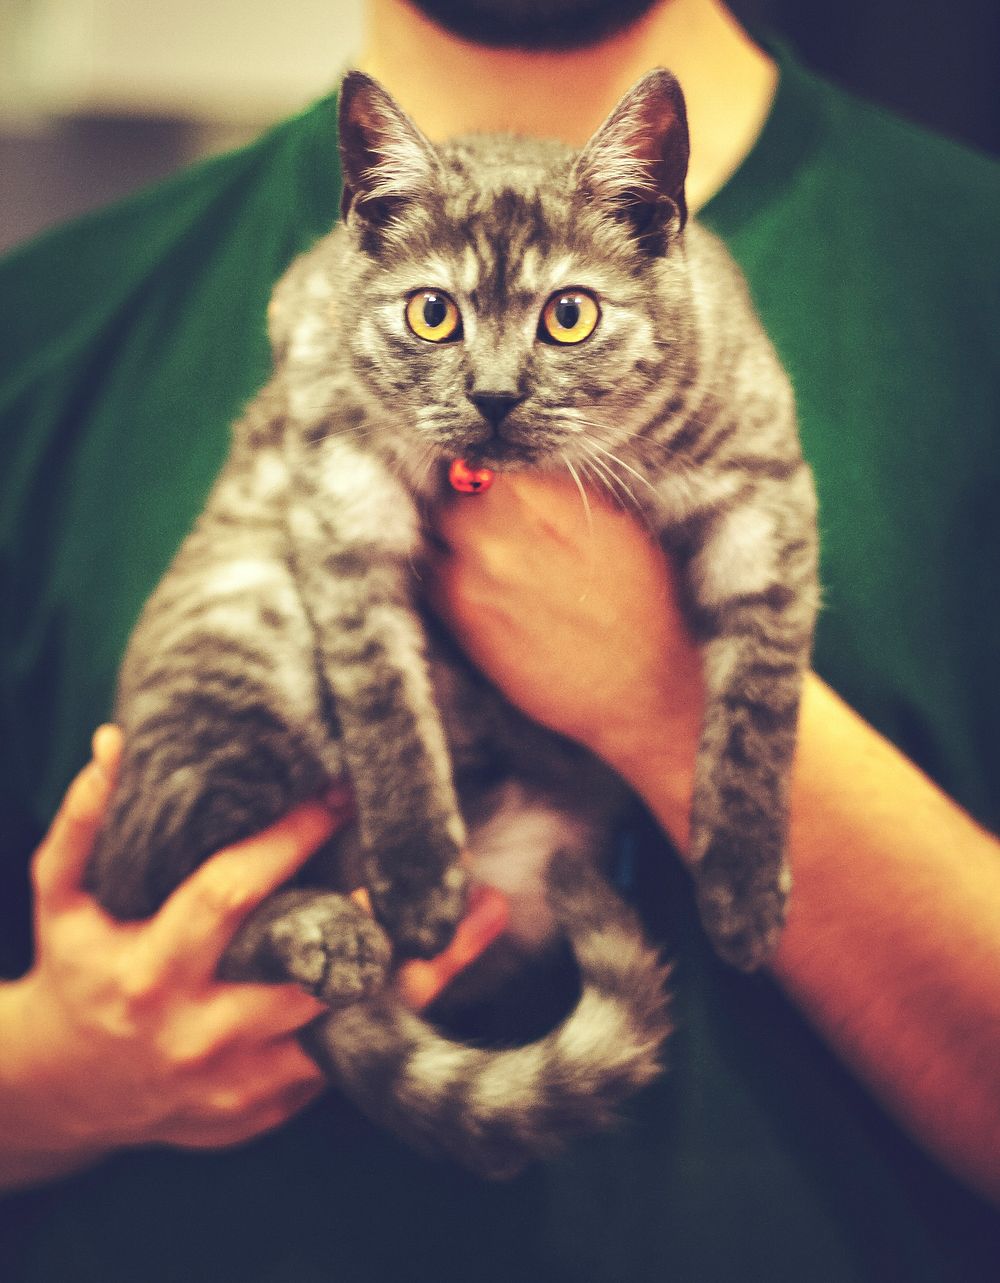 Man holding a furry cat. Visit Kaboompics for more free images.